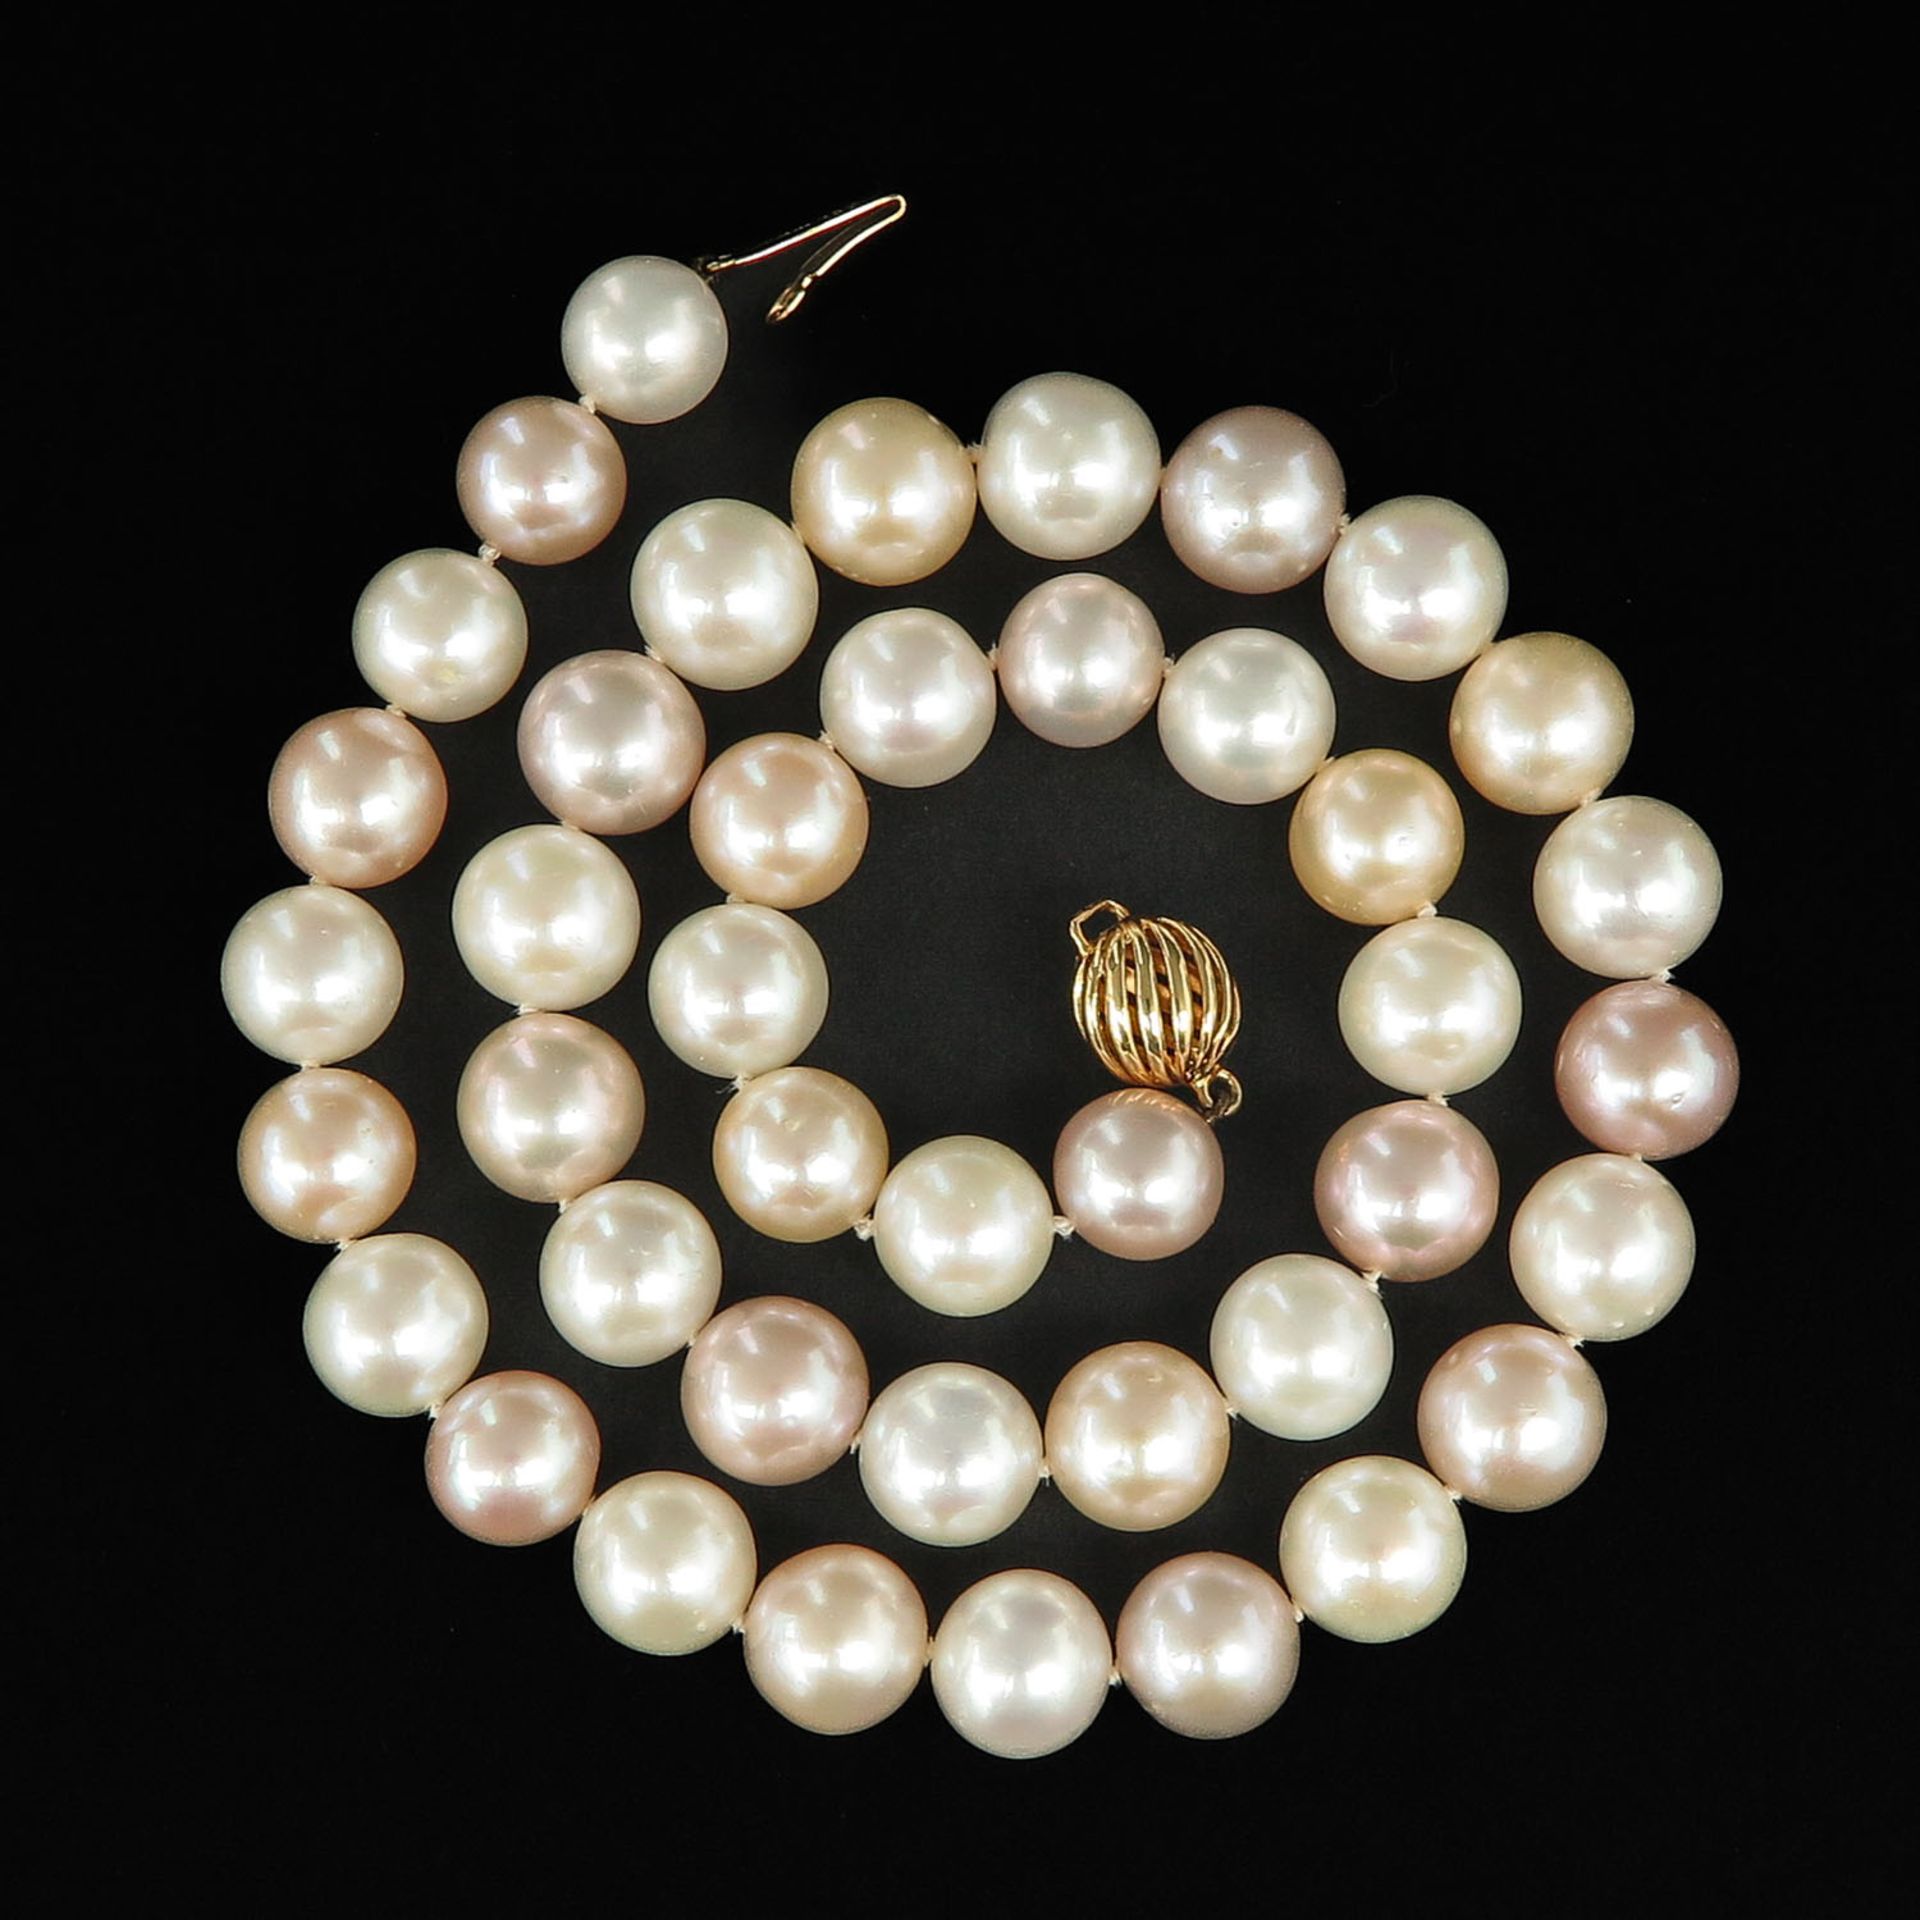 A Single Strand Pearl Necklace - Image 3 of 6